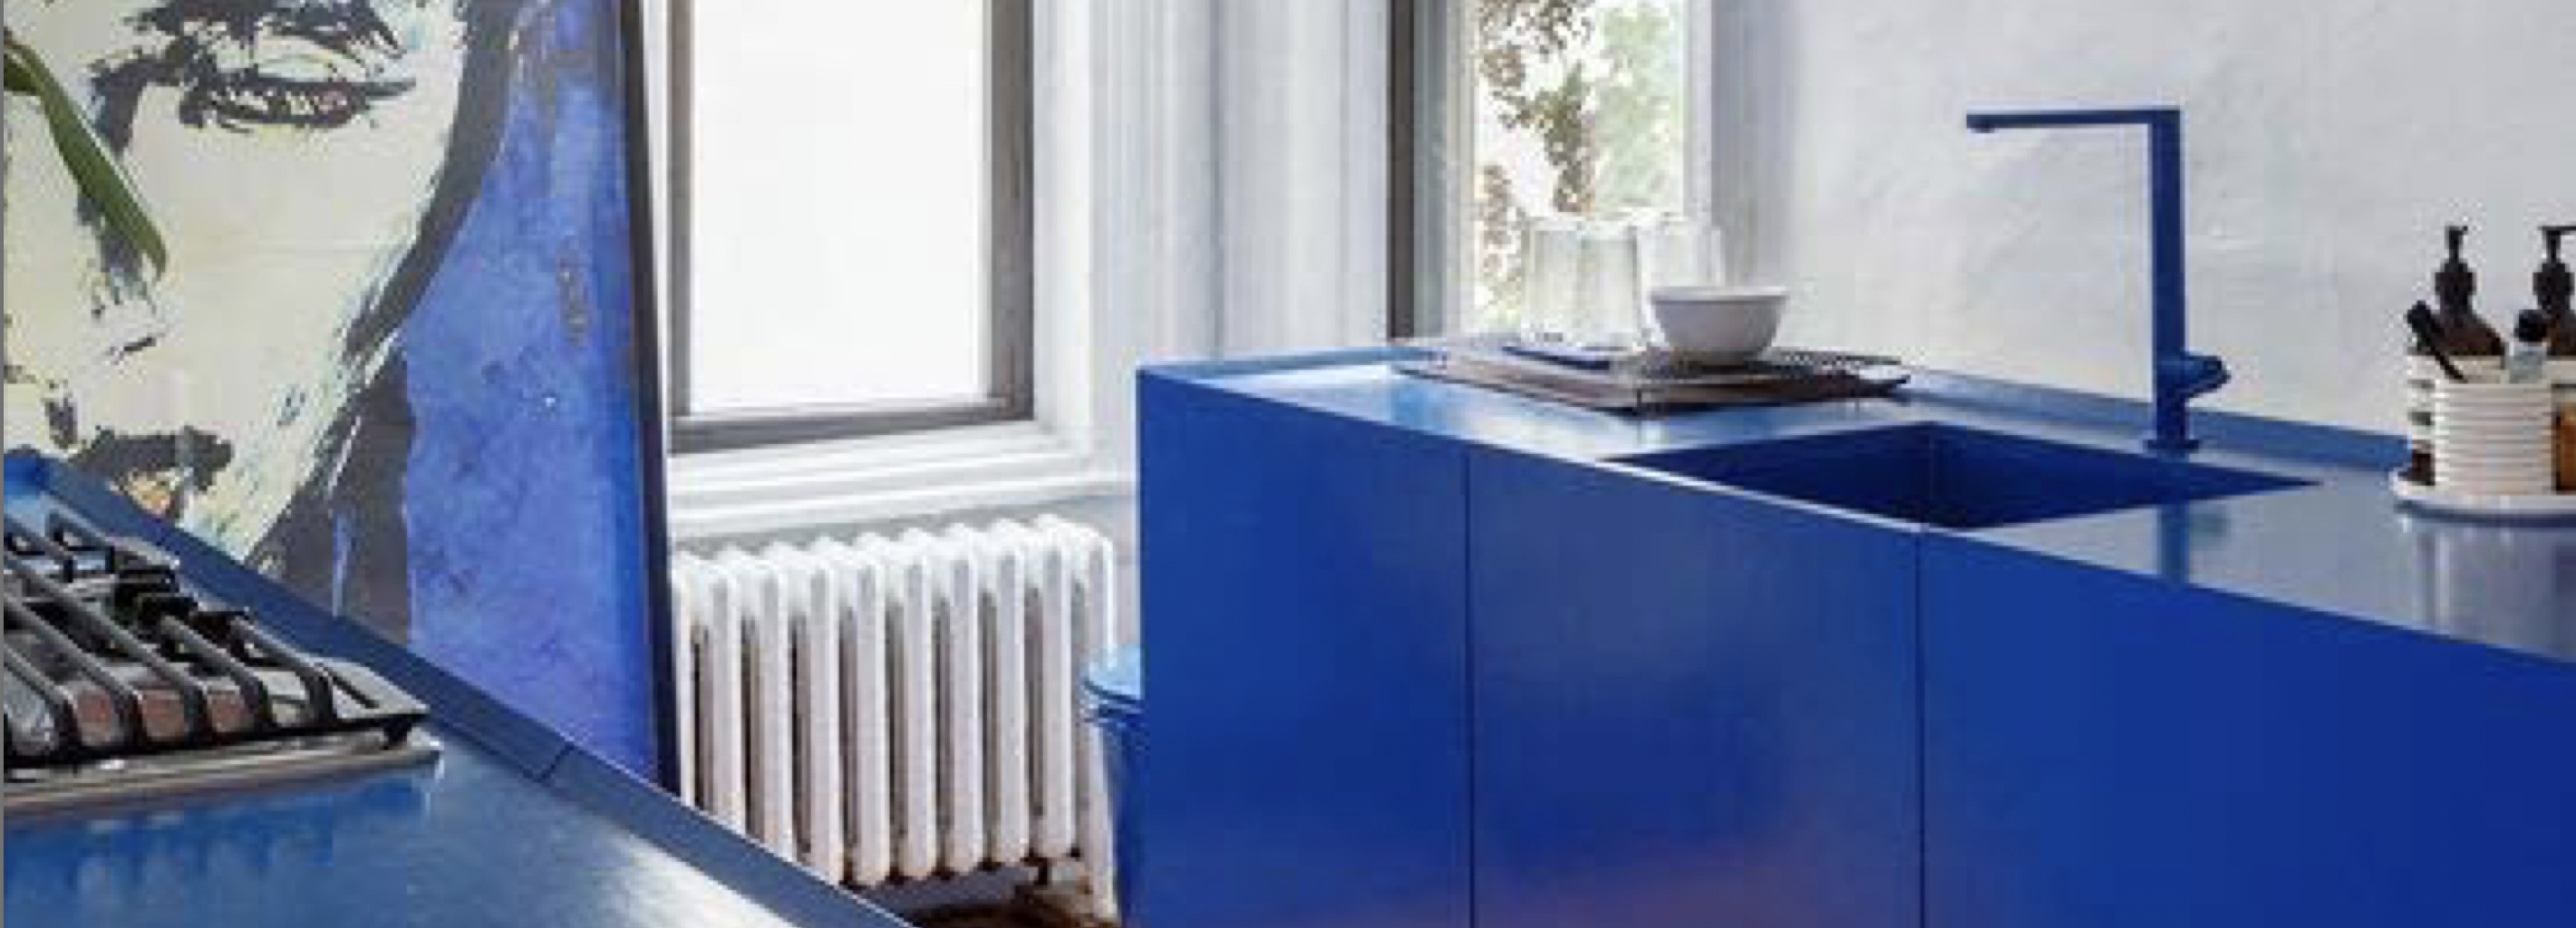 Blue is the latest kitchen trend